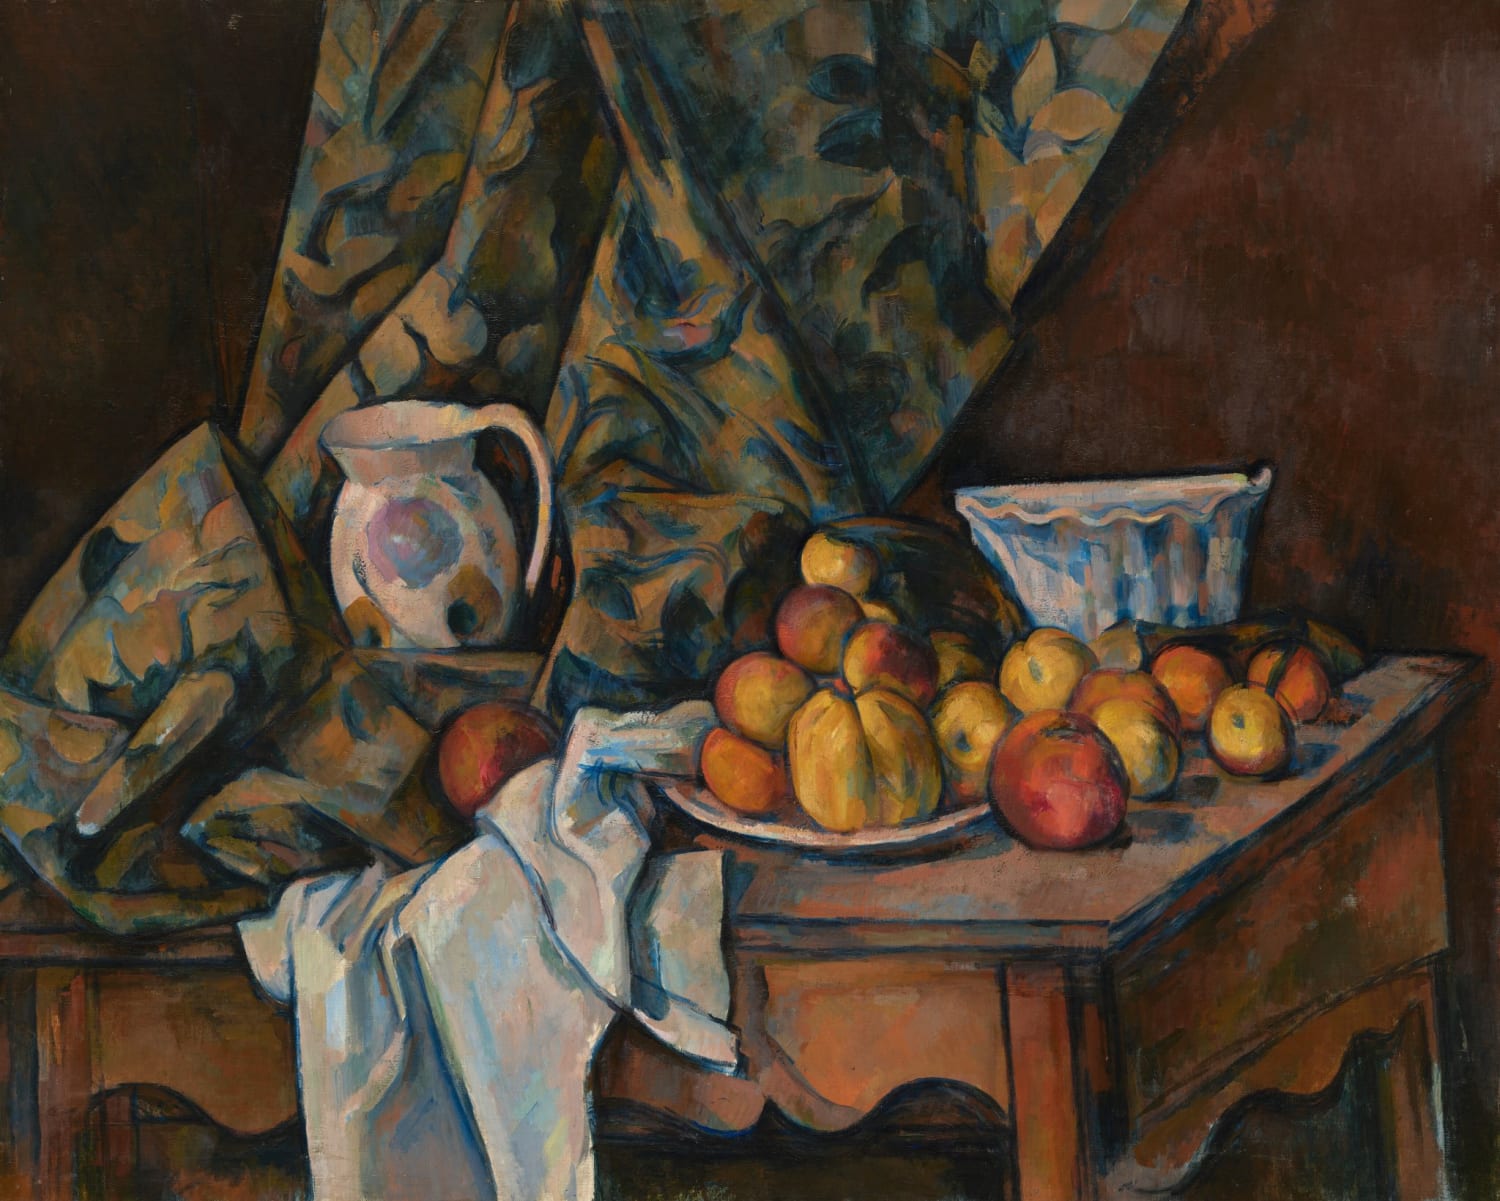 The way Paul Cézanne defied traditional rules of perspective with his still life paintings >>>